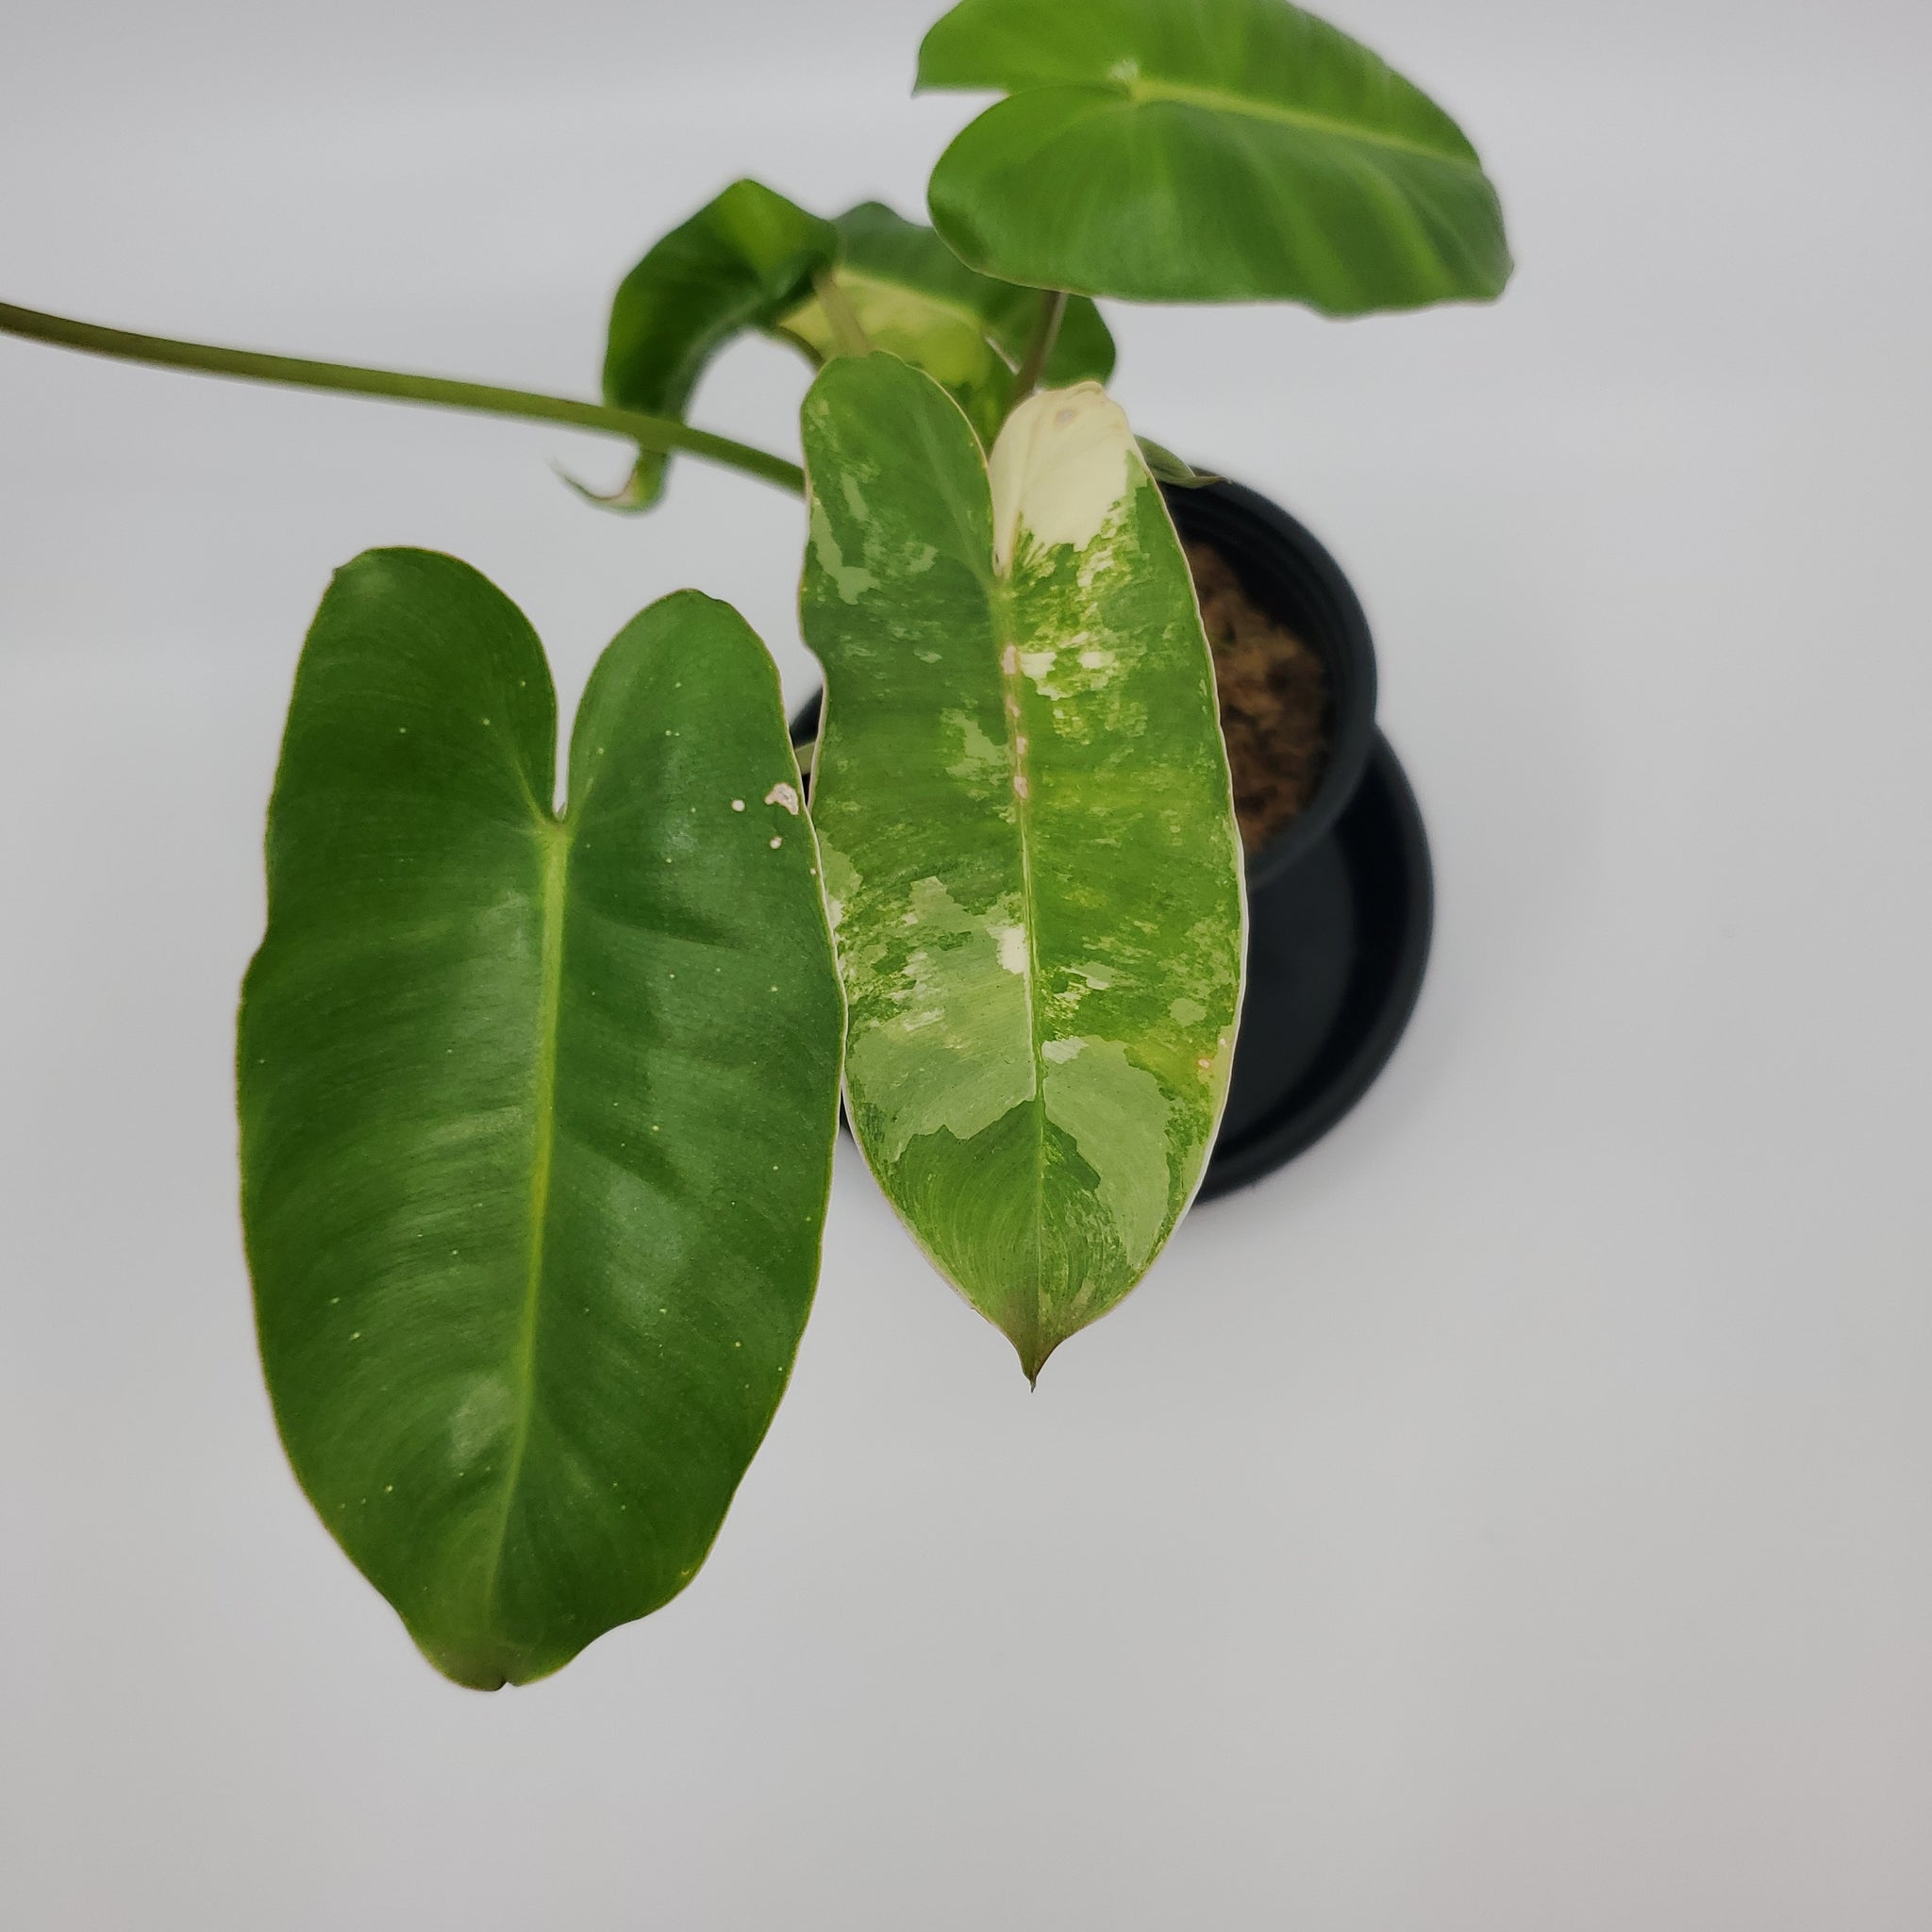 Philodendron Burle Marx Variegated "A14"